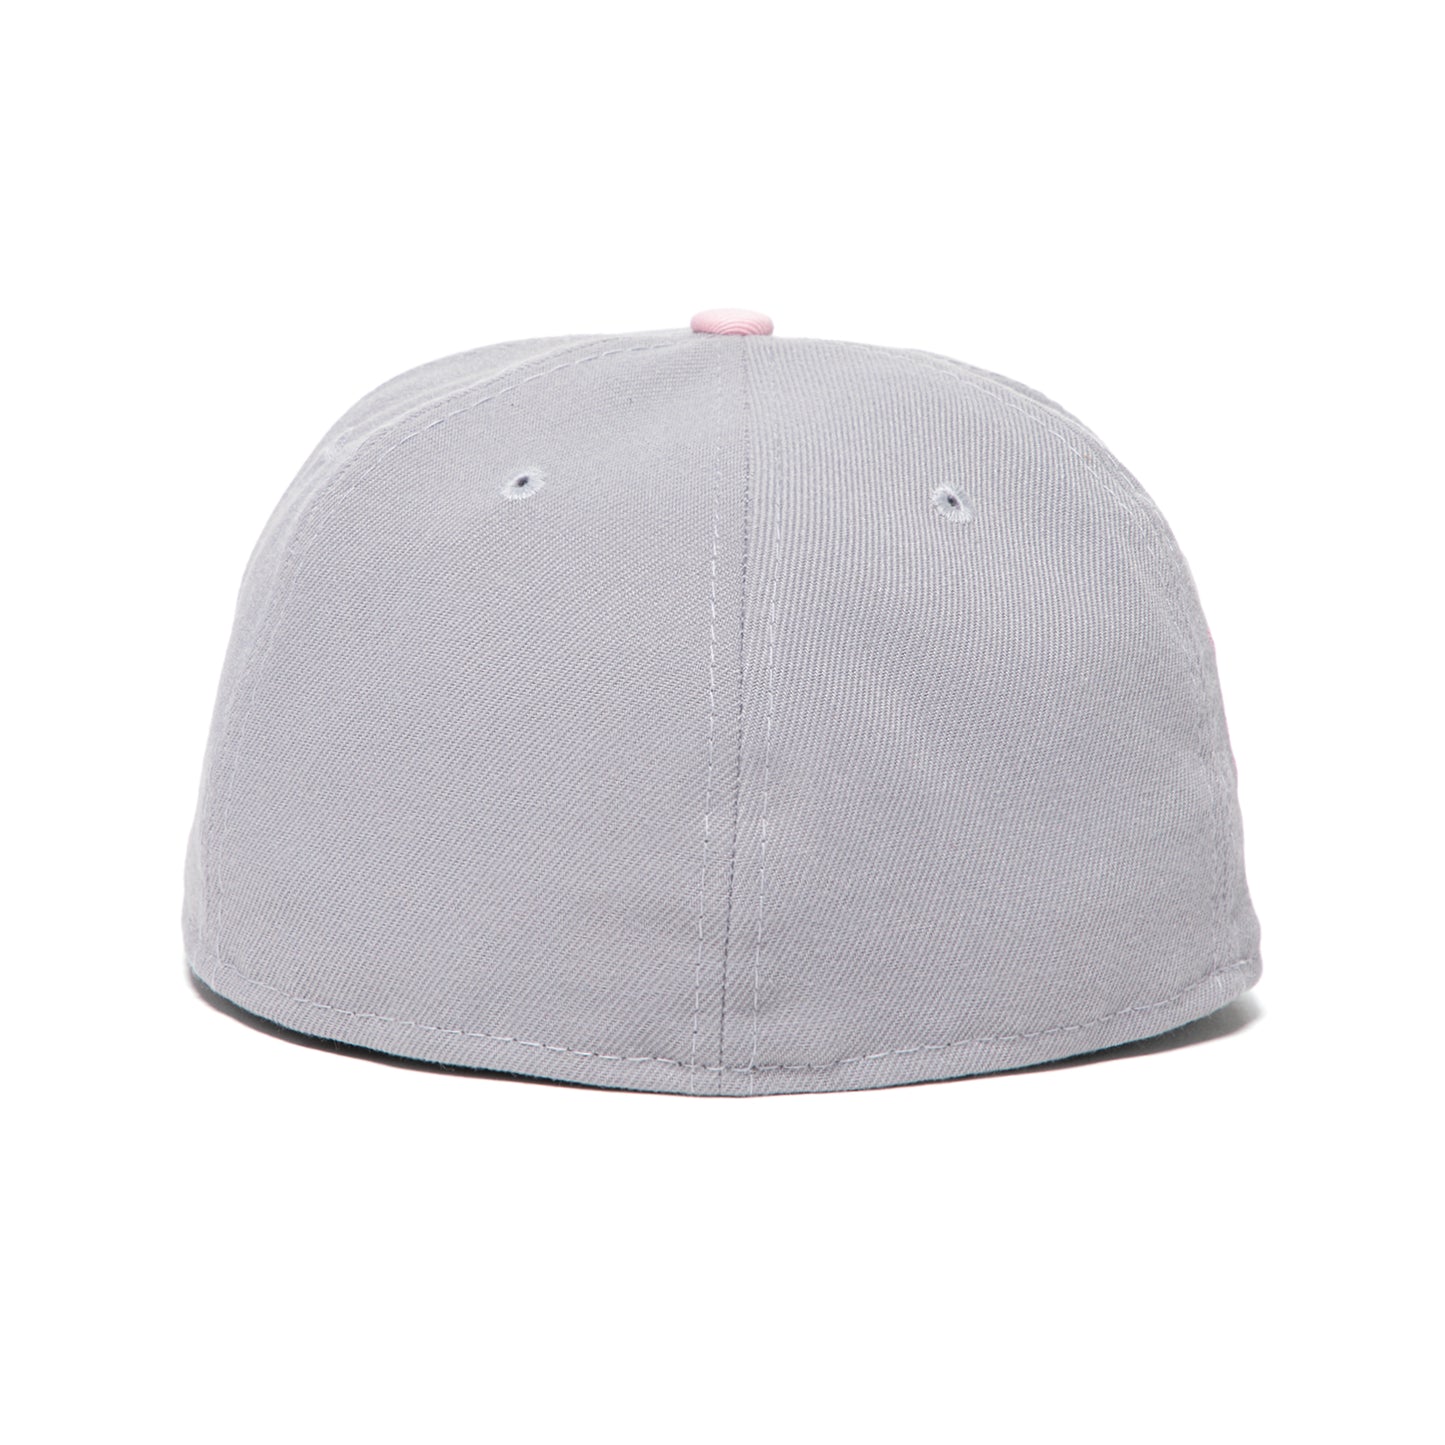 Concepts x New Era 5950 New York Yankees Fitted Hat (Gray/Pink)